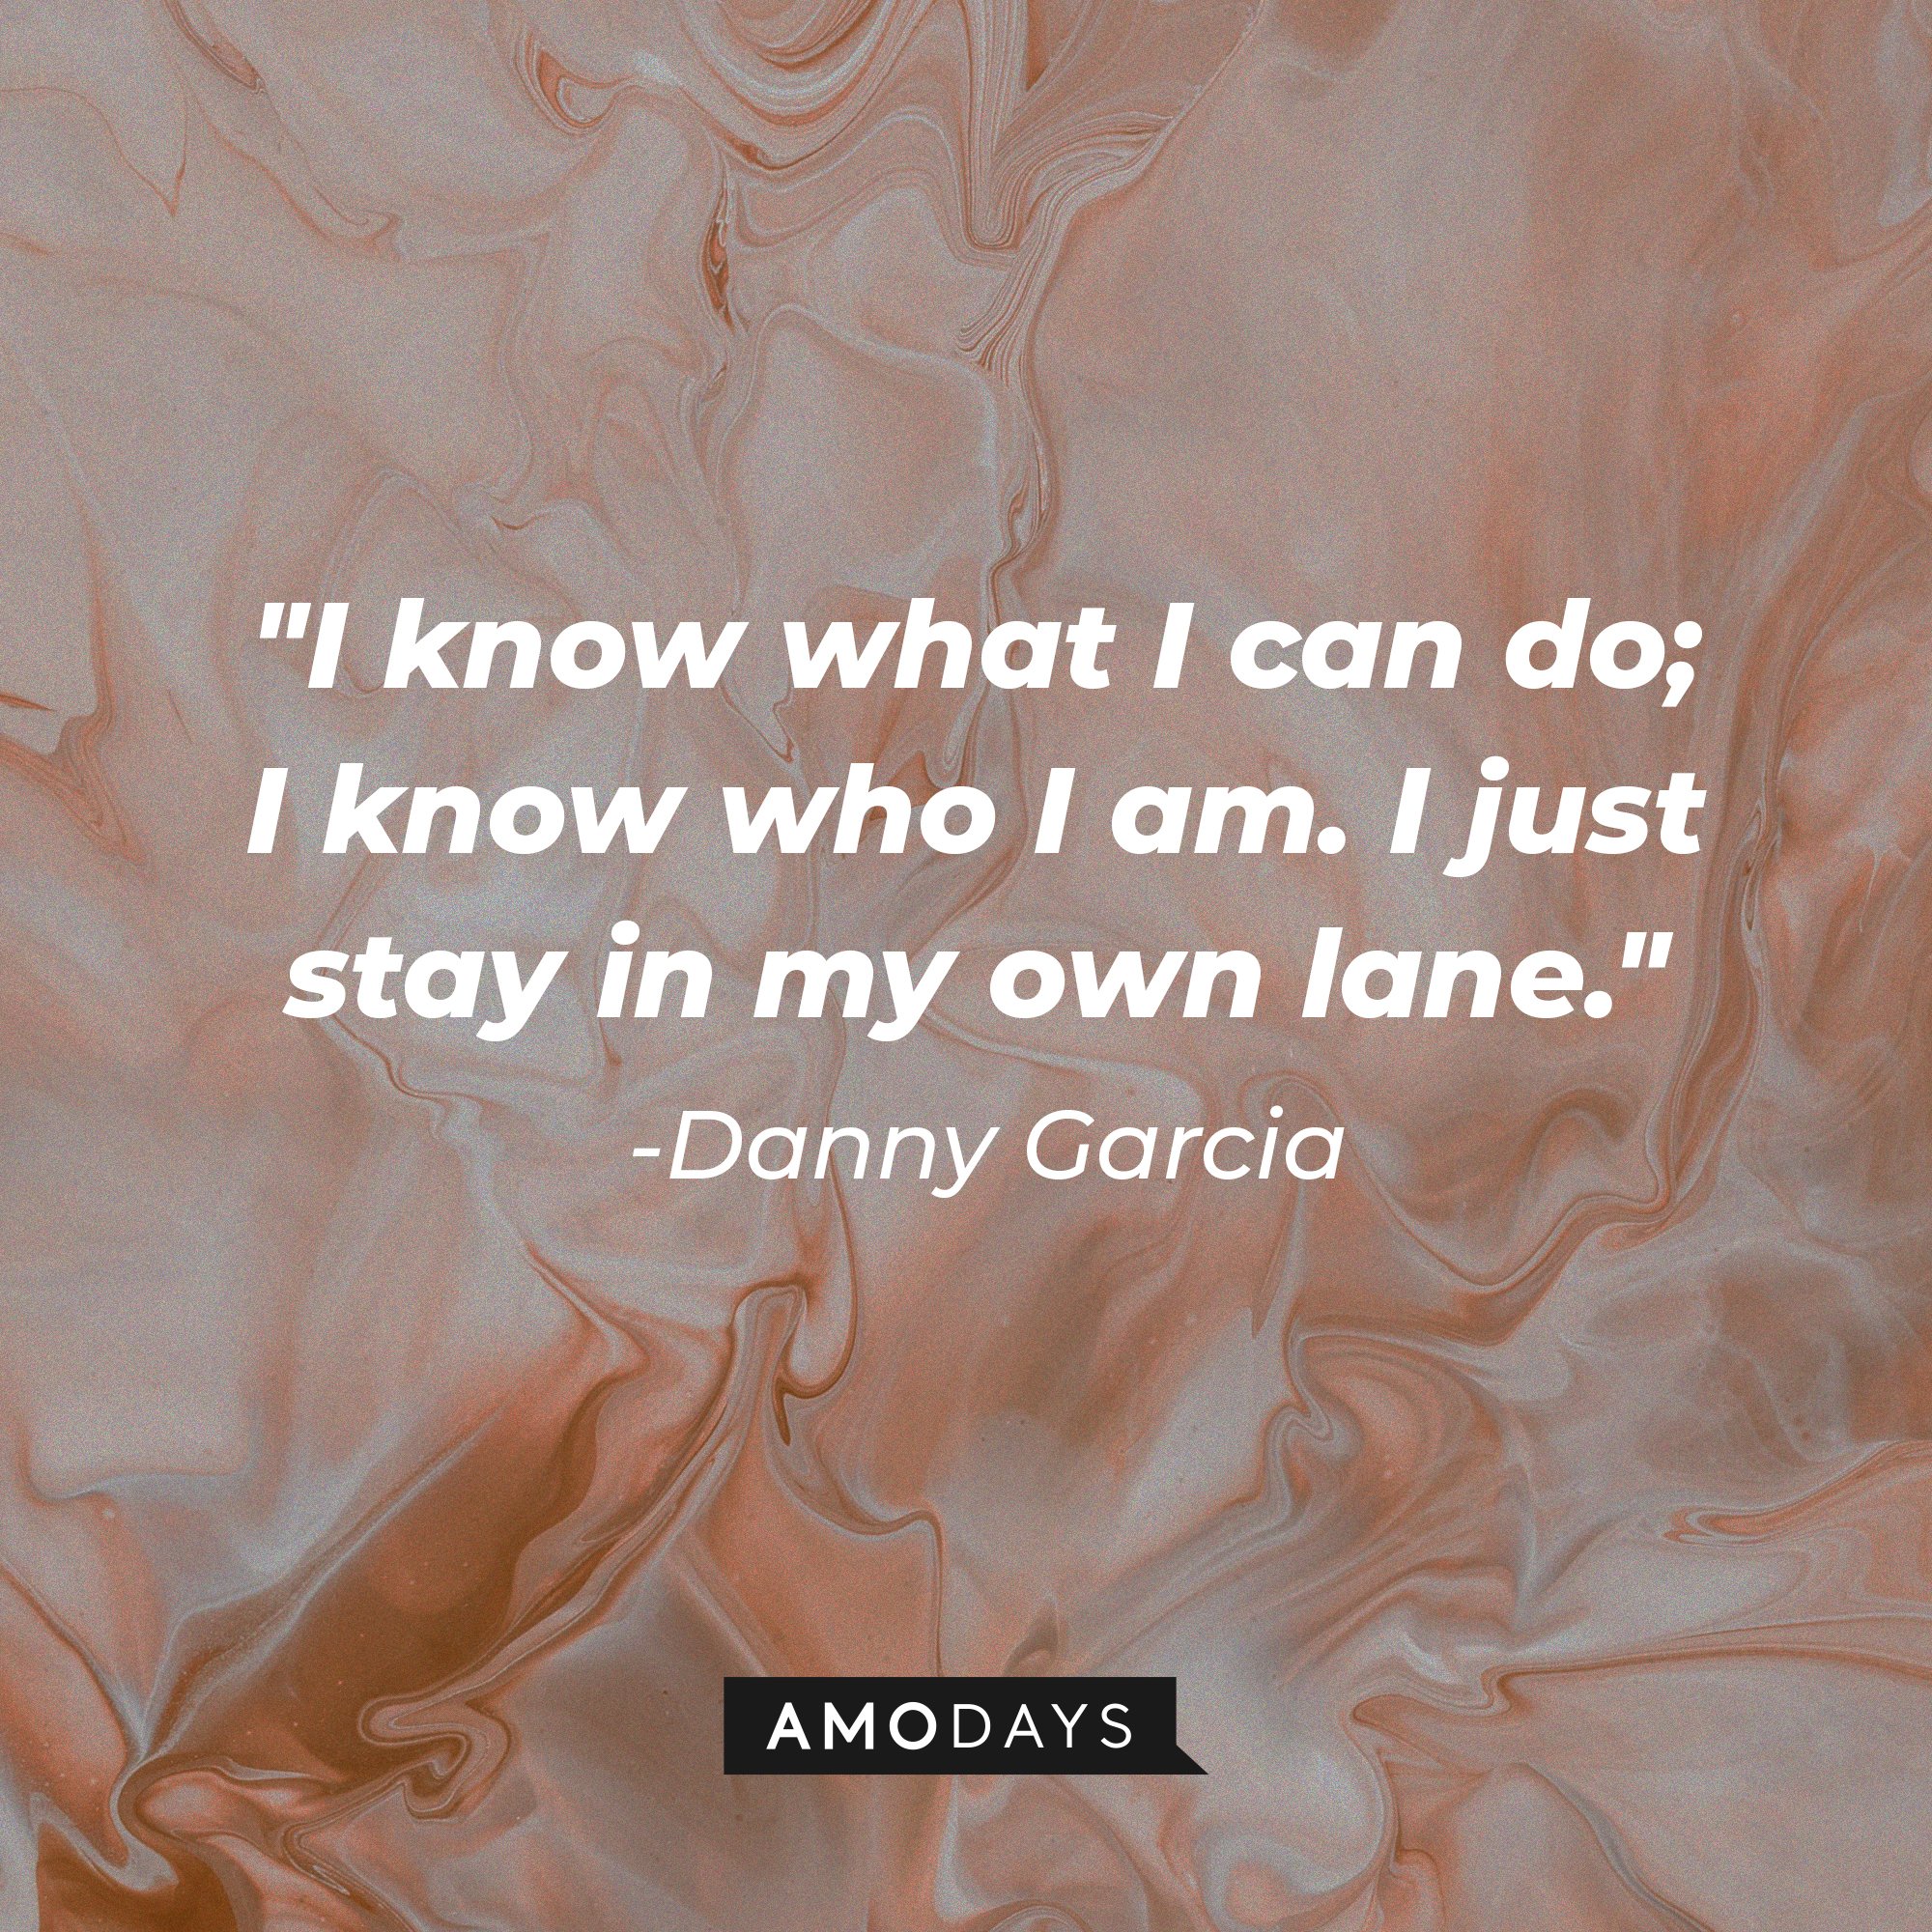 Danny Garcia’s quote: "I know what I can do; I know who I am. I just stay in my own lane." | Image: AmoDays